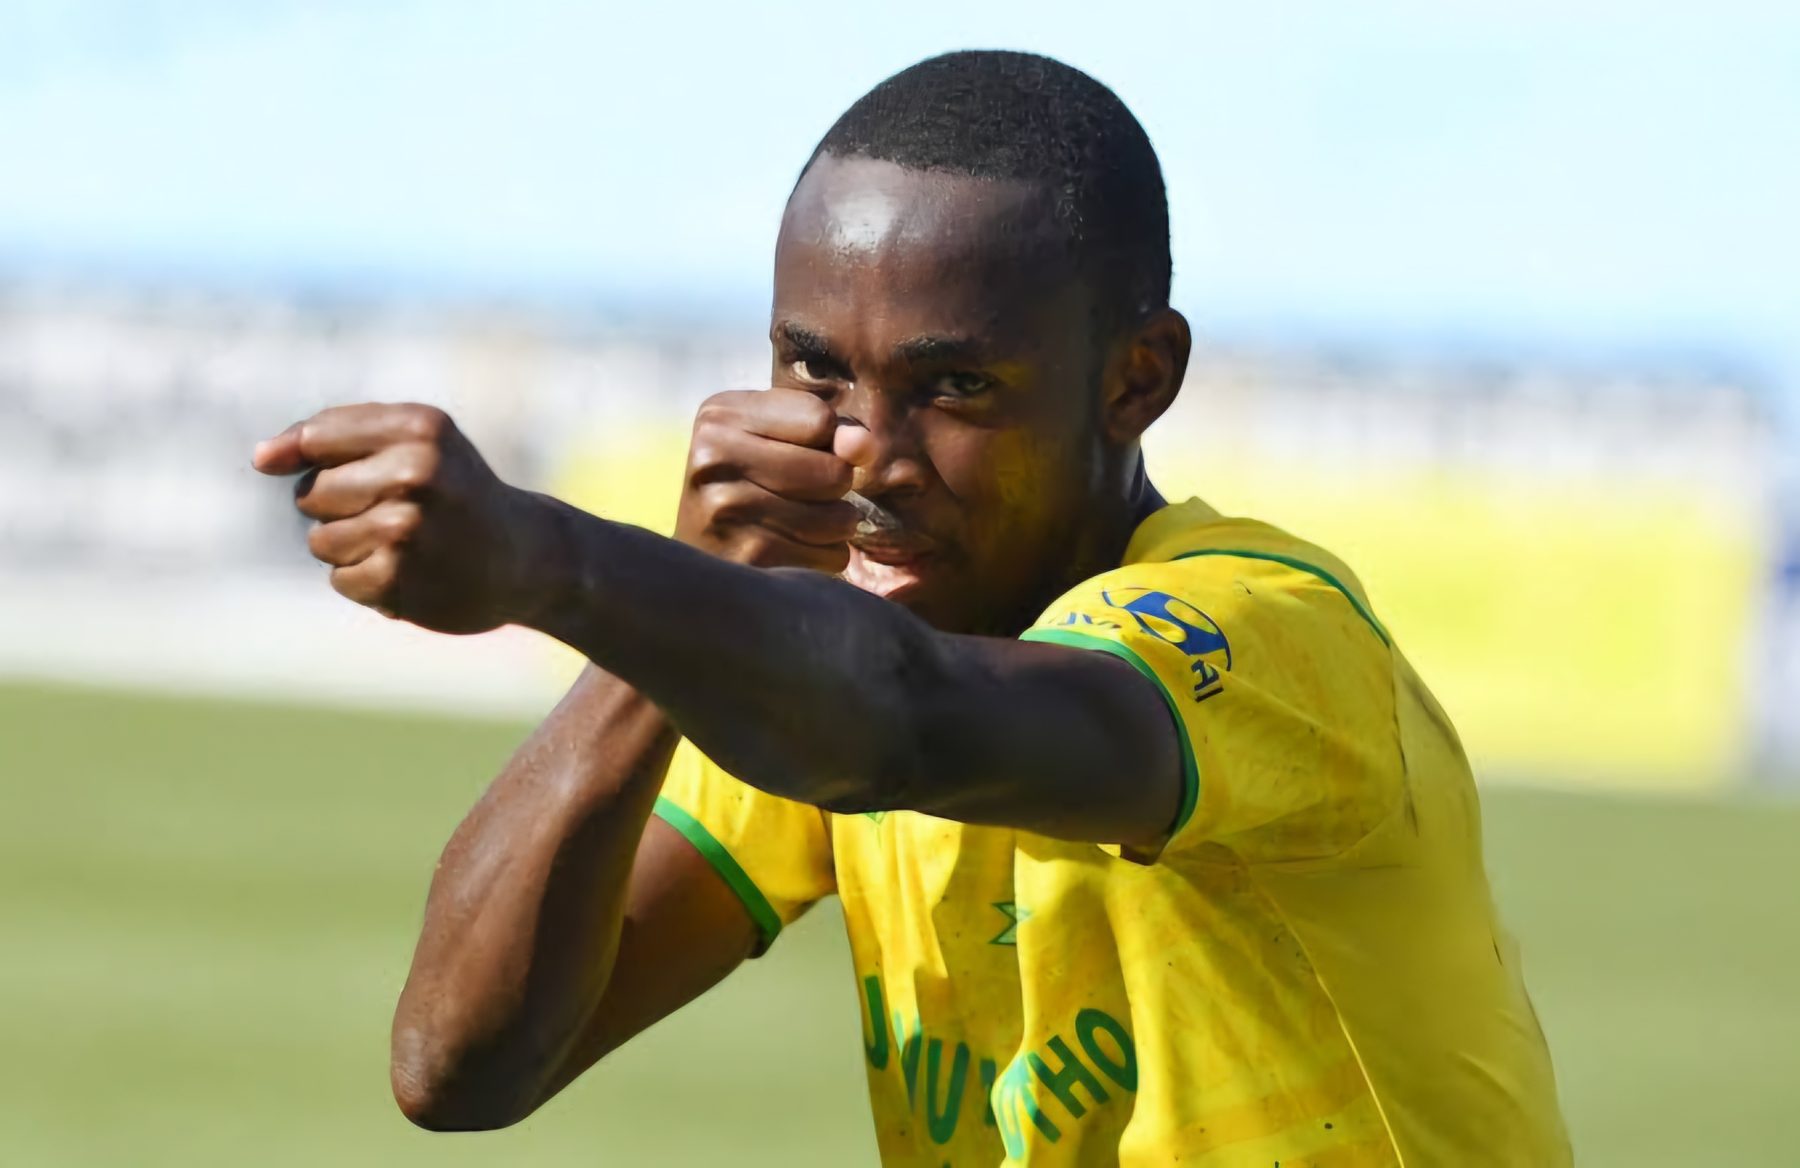 Sundowns secure revenge and top spot with win over Mazembe